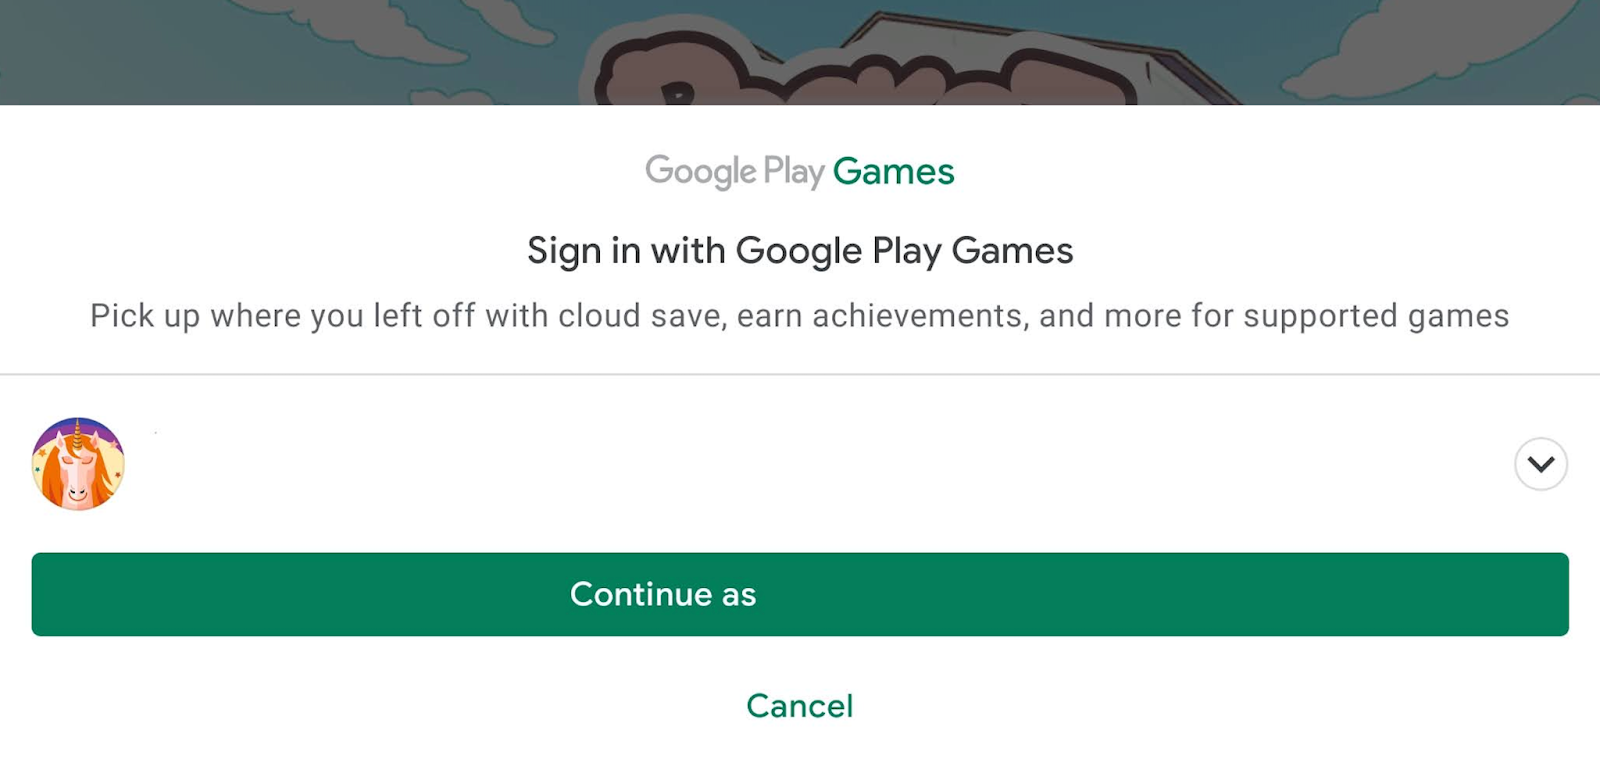 Sign-in, Play Games Services